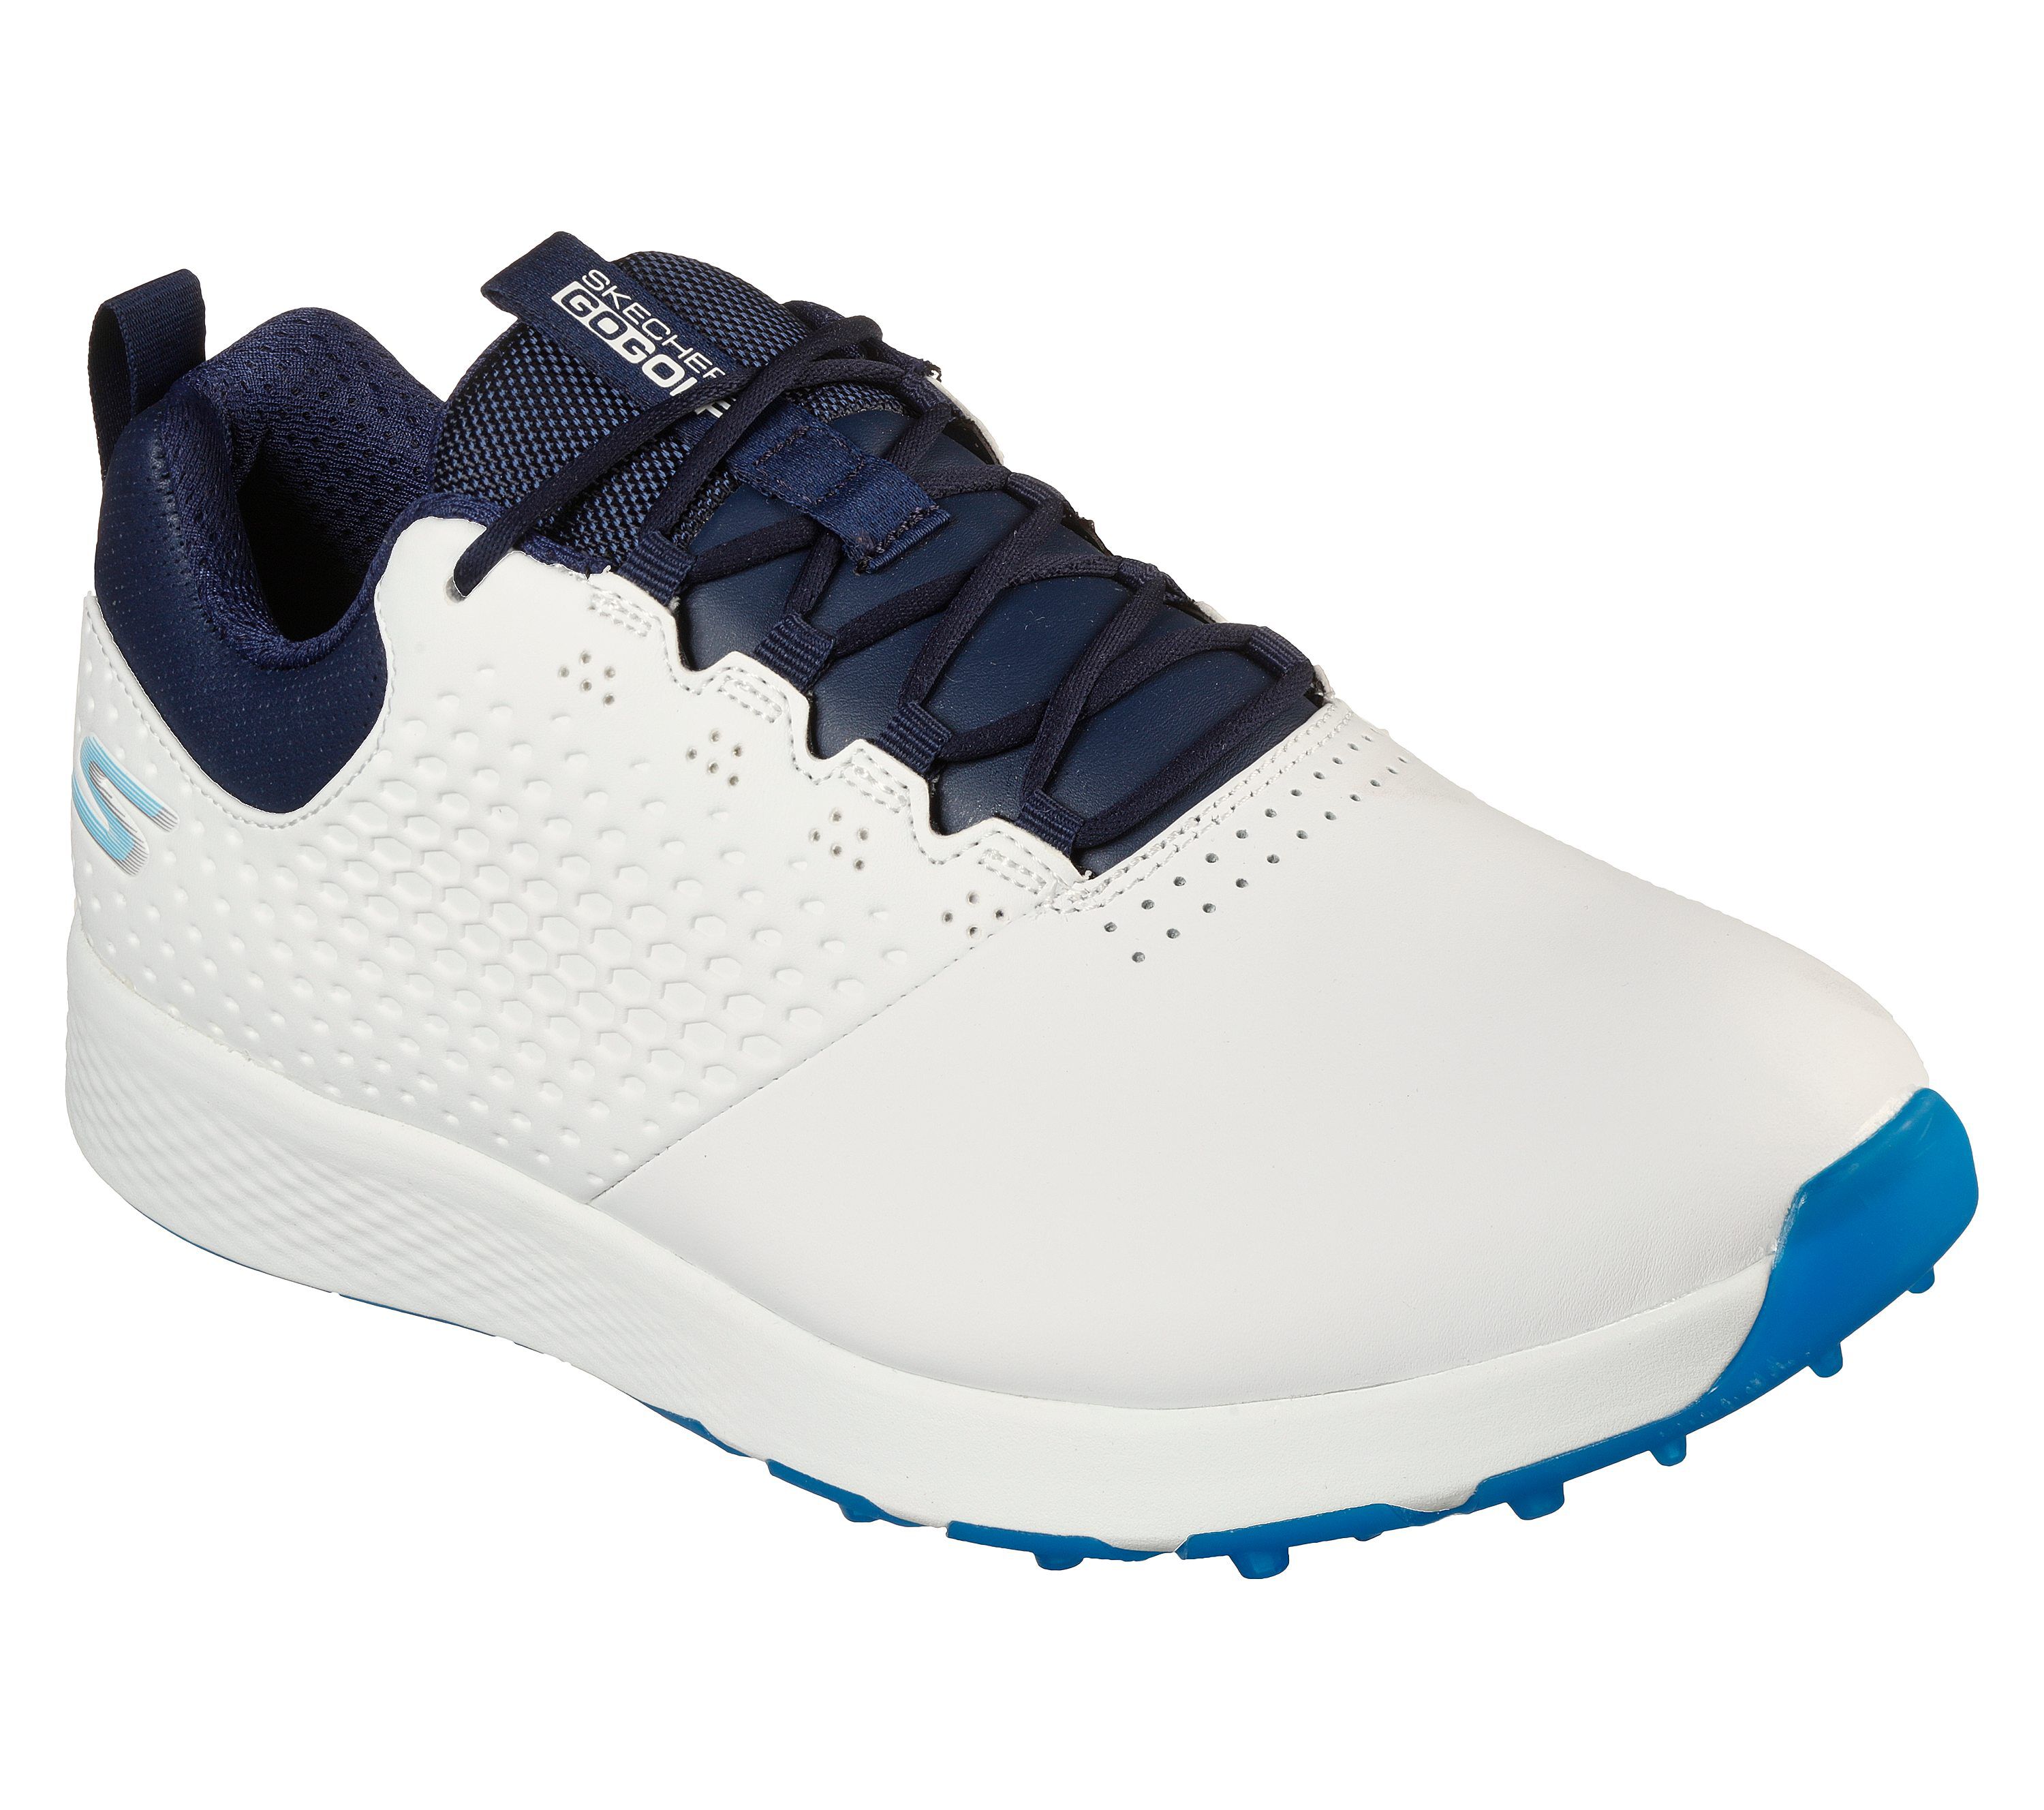 skechers golf shoes relaxed fit